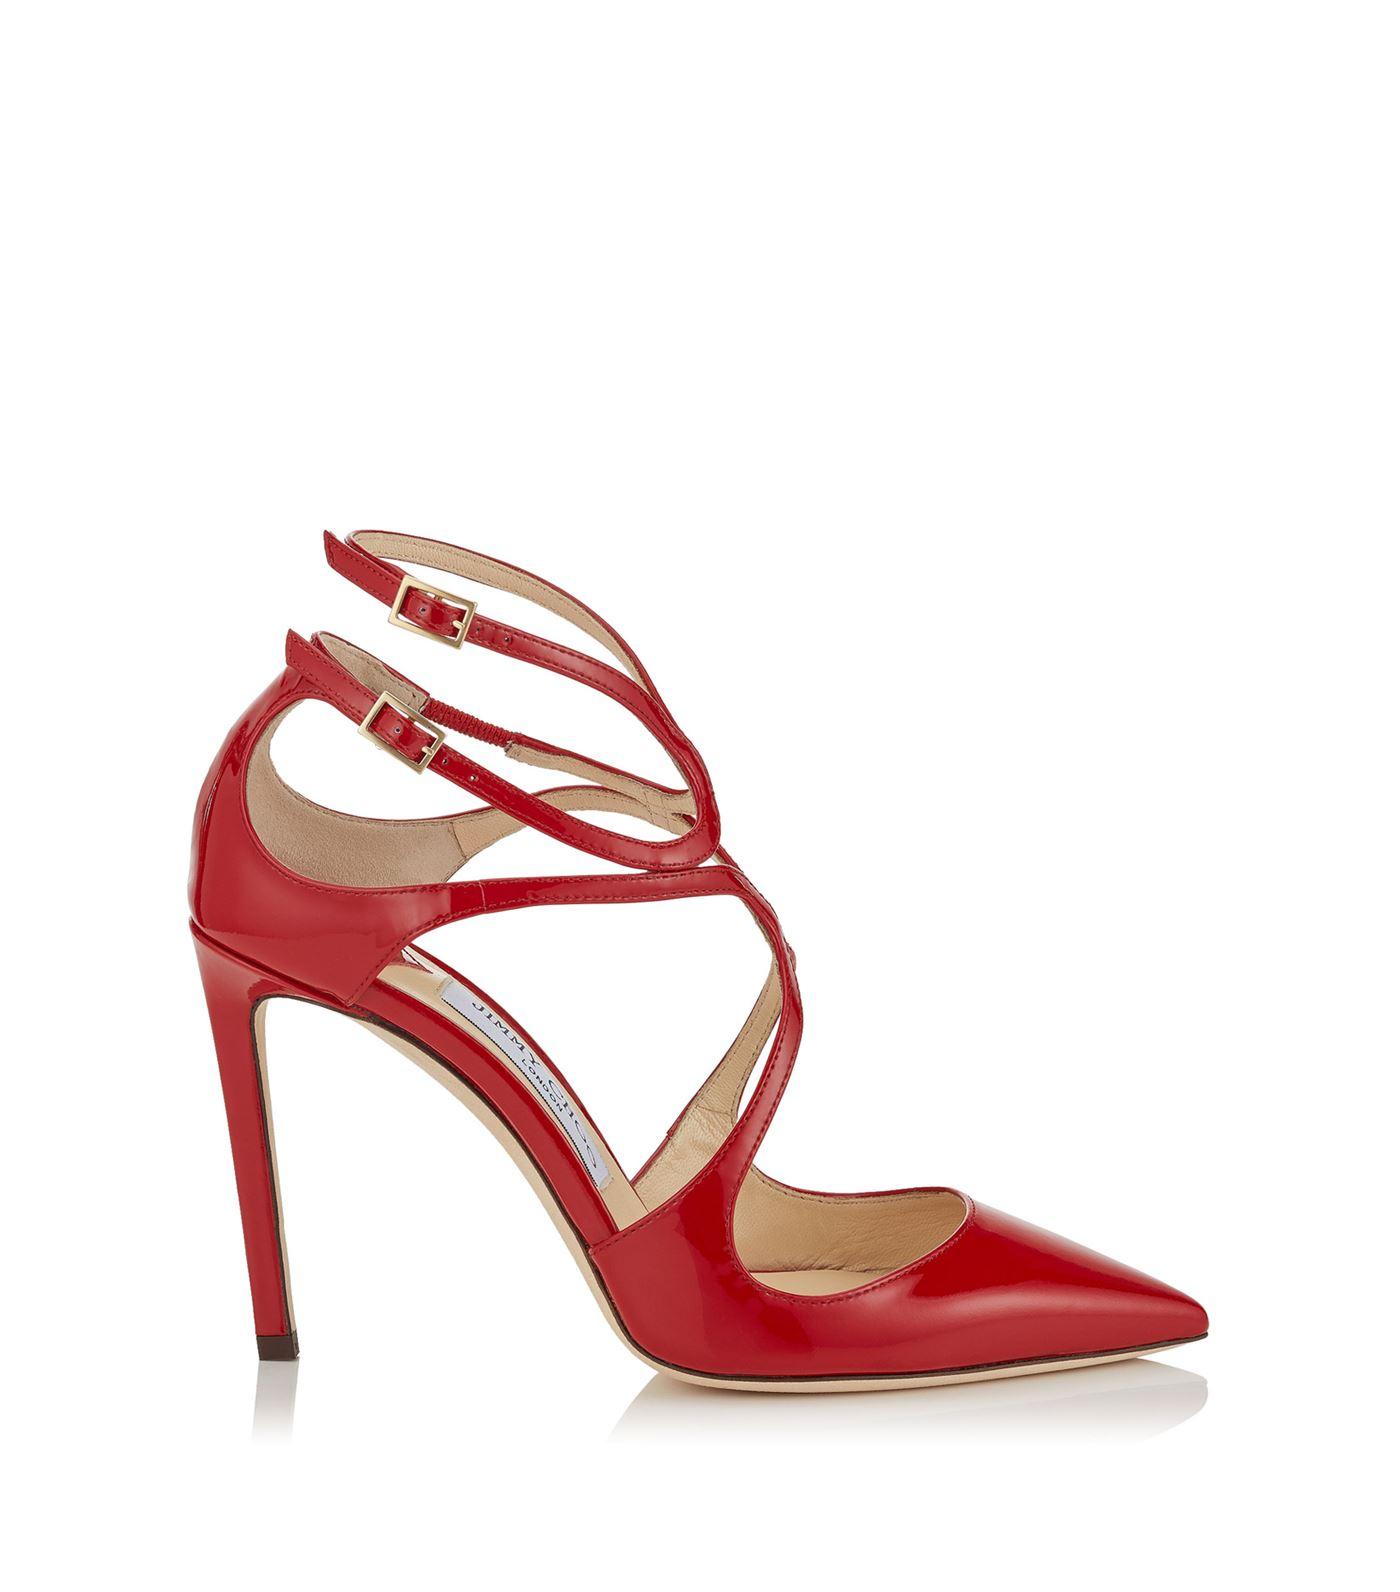 Jimmy Choo Leather Lancer 100 Pumps in Red - Lyst